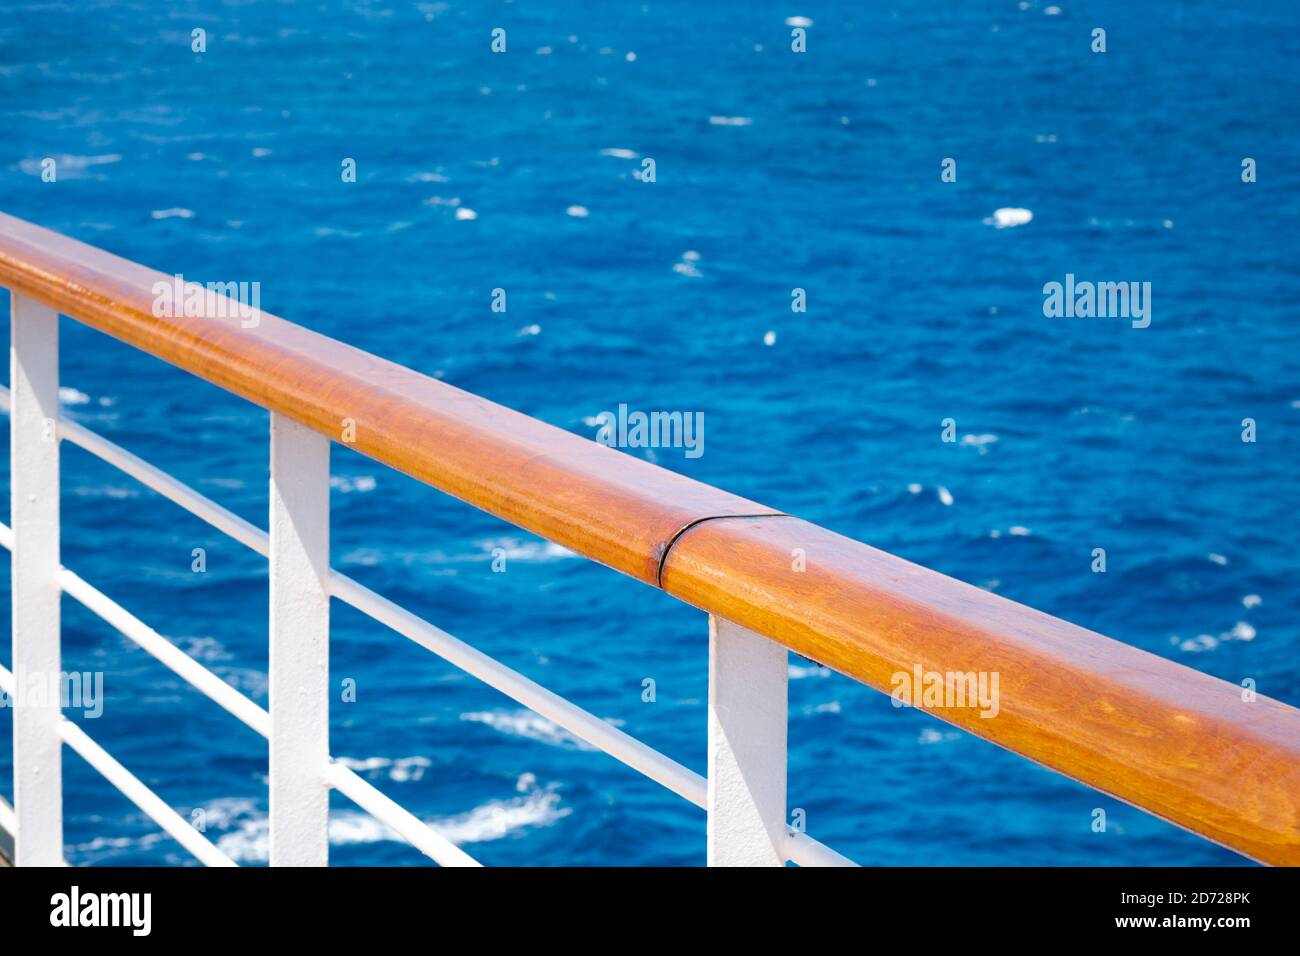 Cruising, relaxation at sea and maritime travel by cruise ship concept with a peaceful scene of a handrail with nobody around it, overlooking the tran Stock Photo